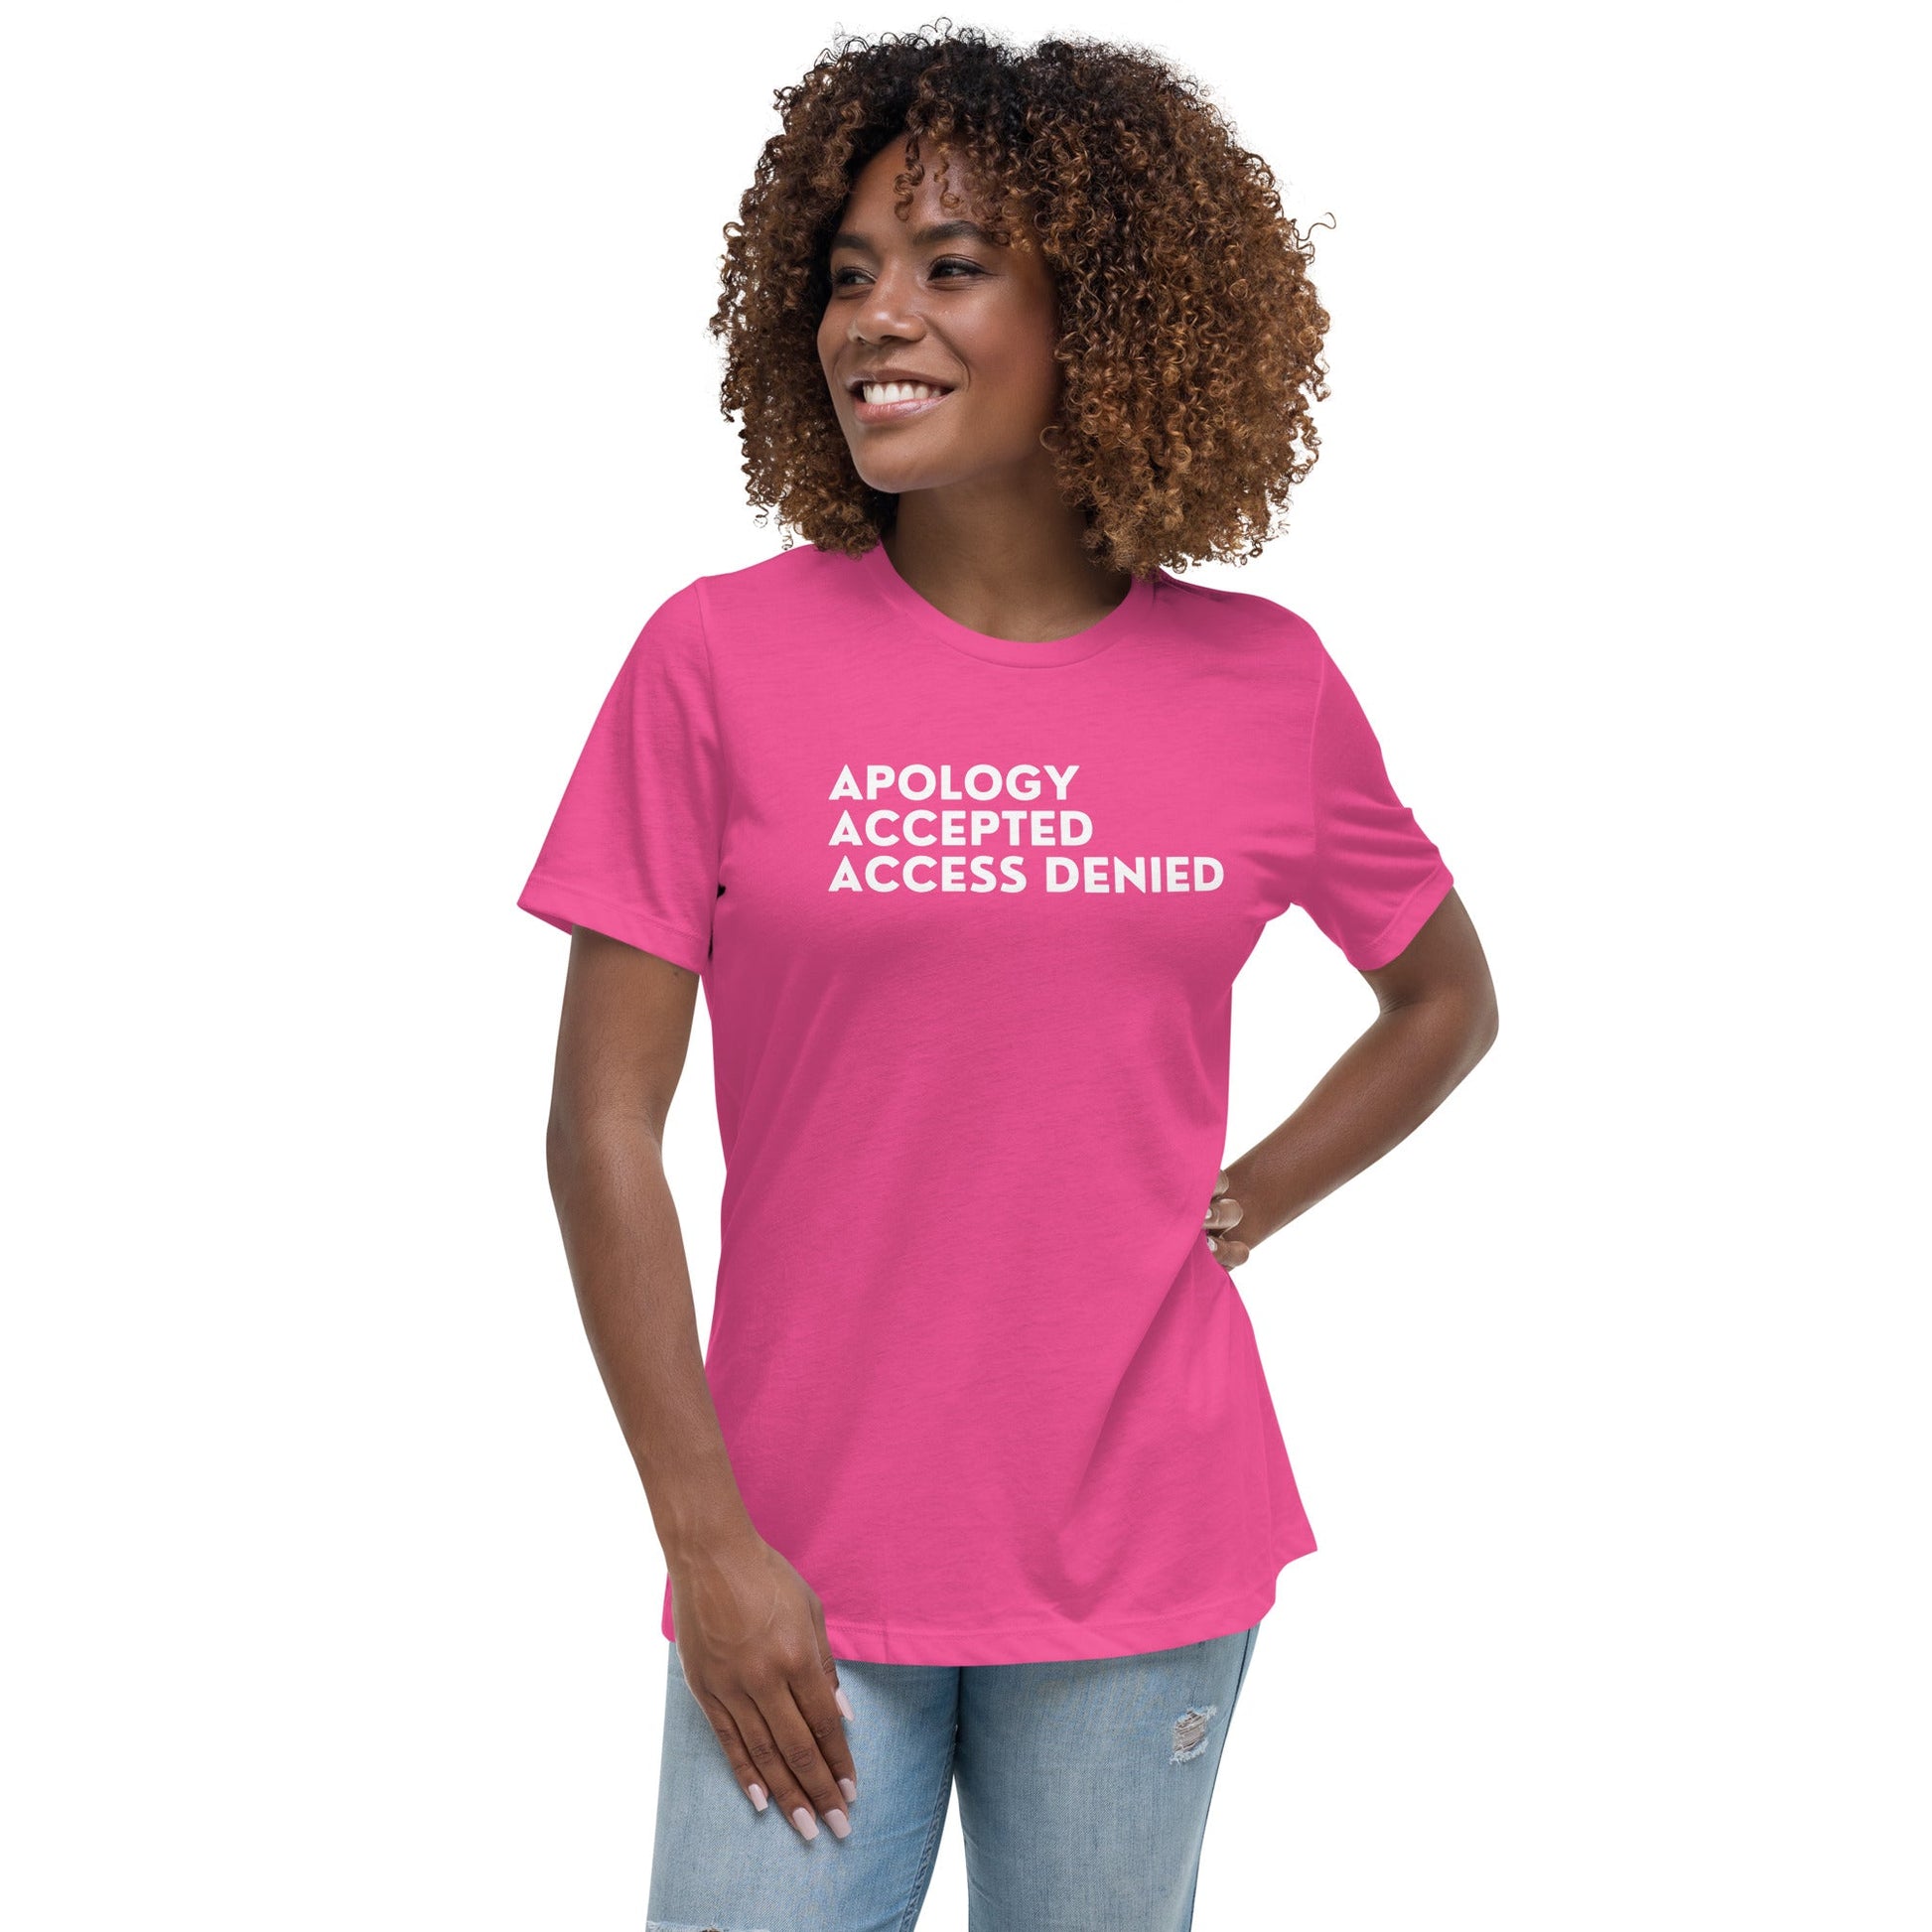 Apology Accepted Access Denied Women's Relaxed T-Shirt - Catch This Tea Shirts